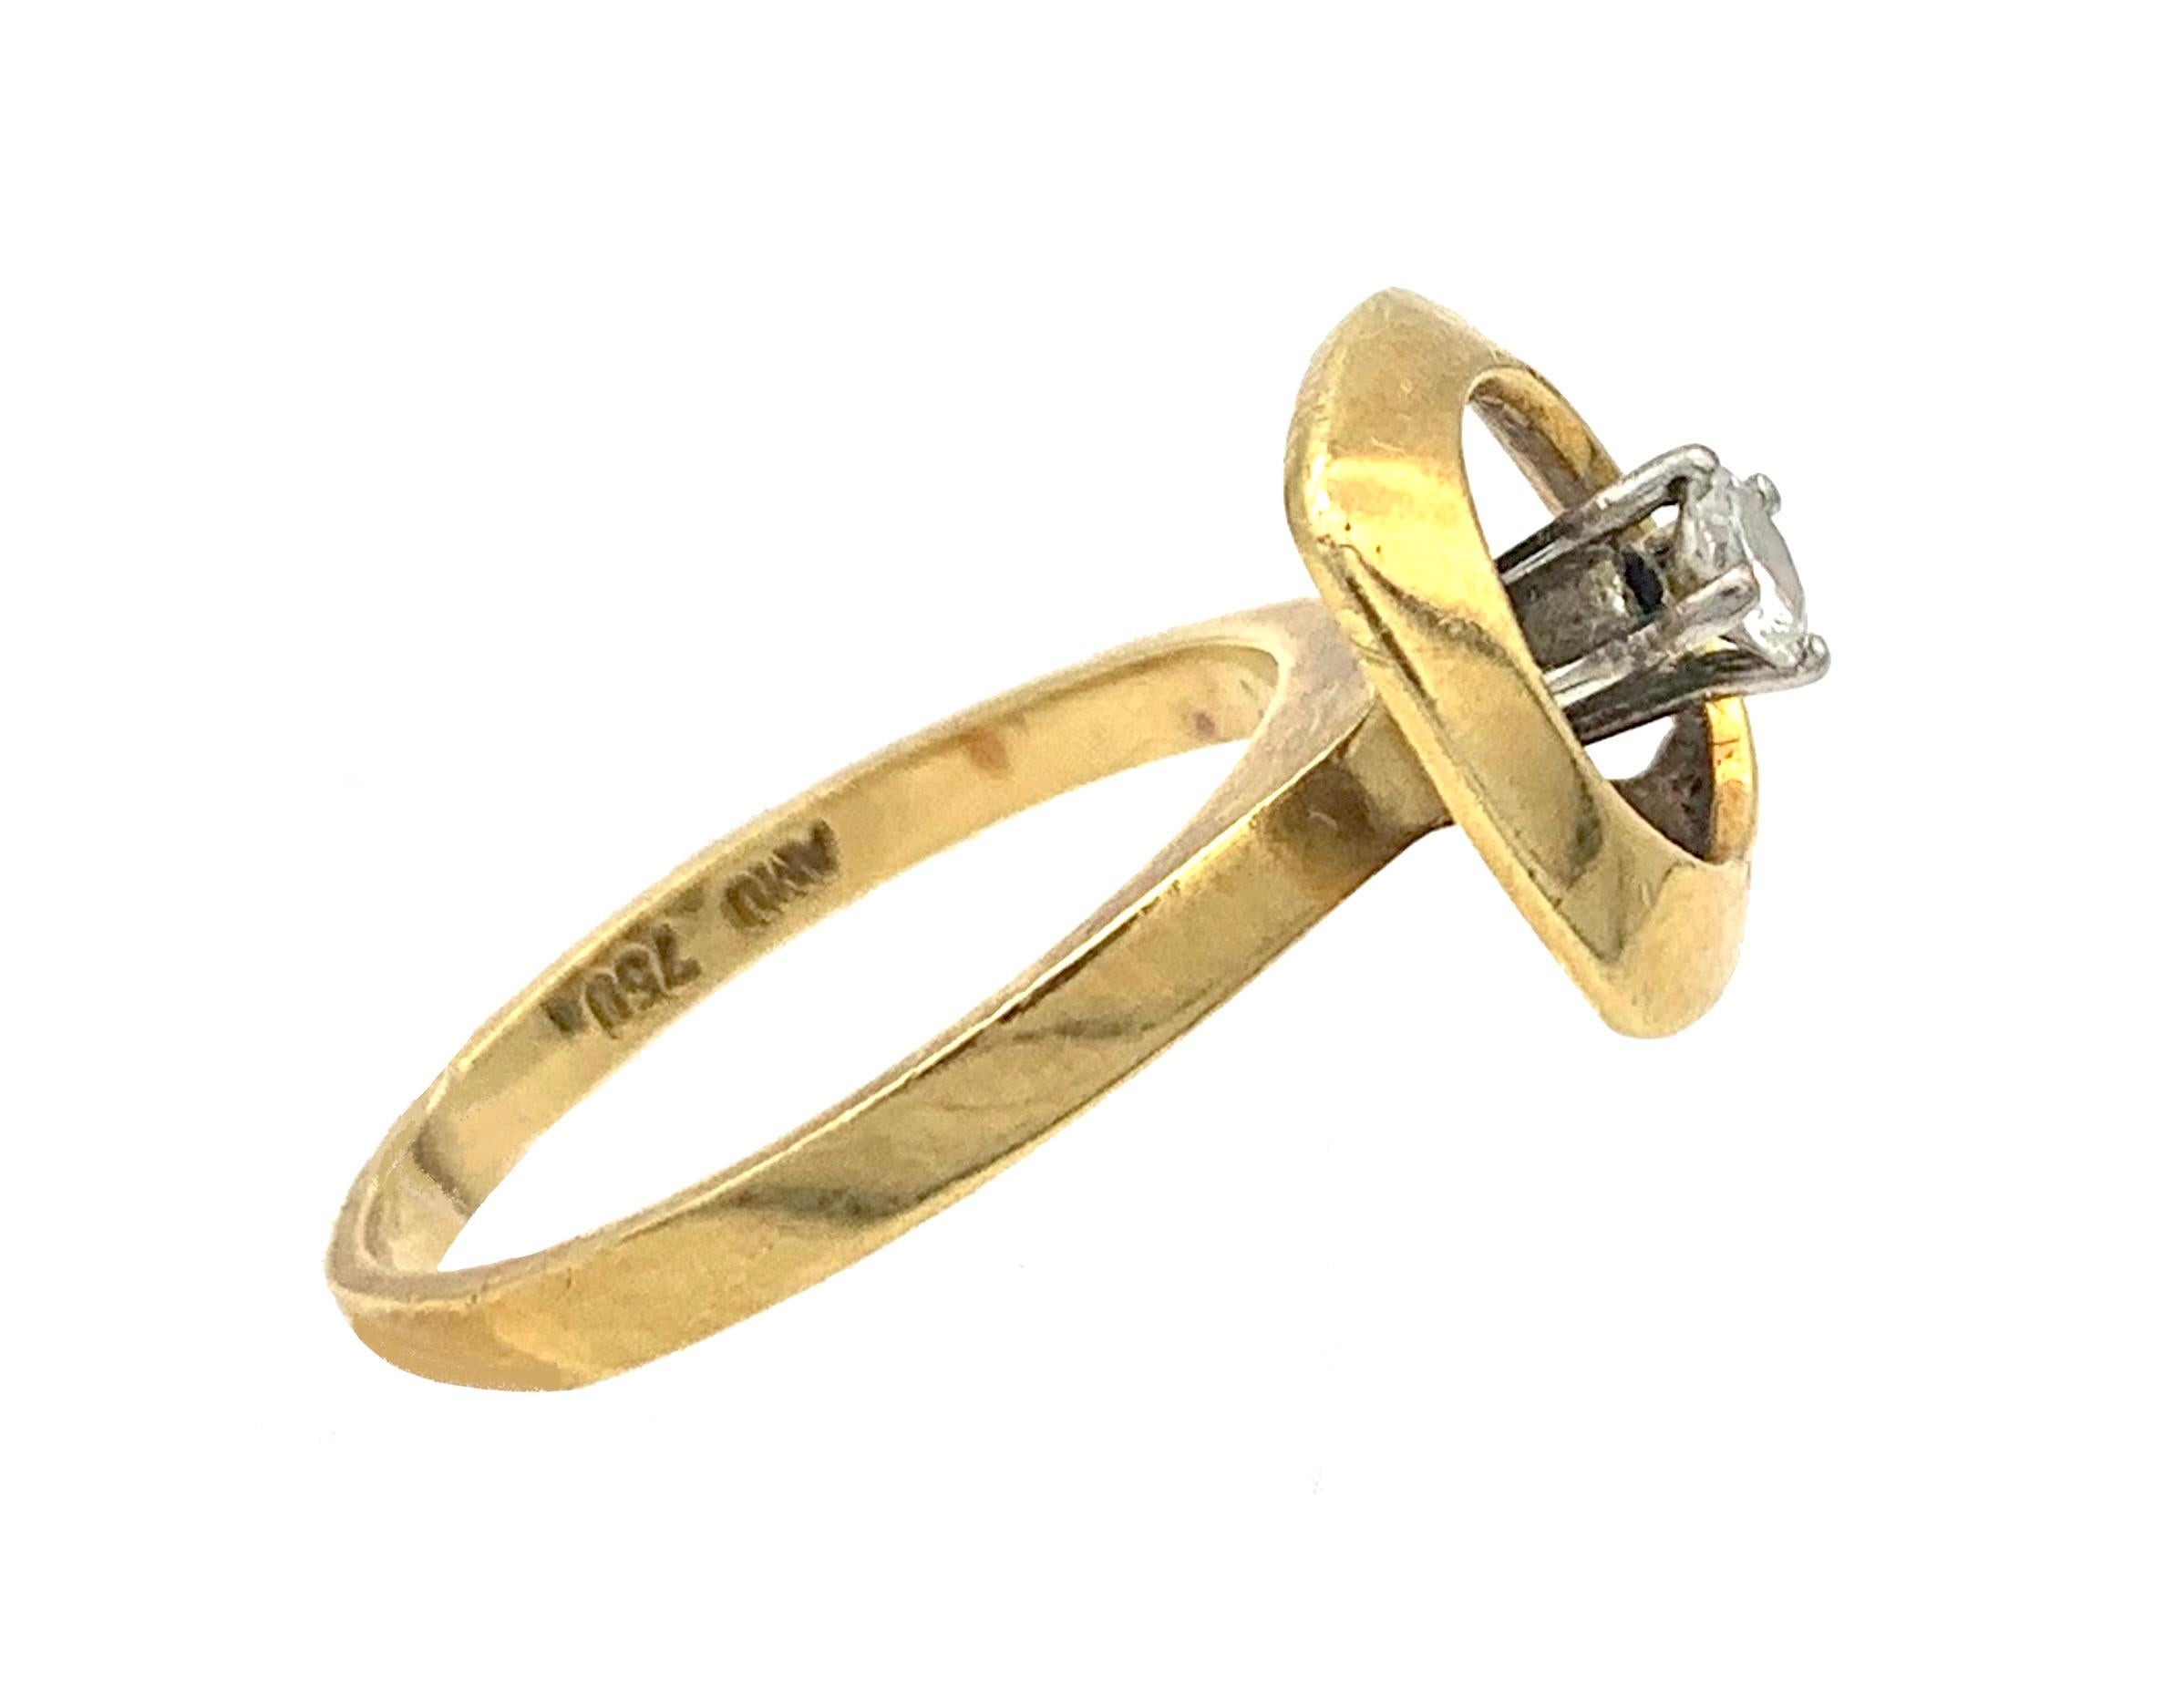 This elegant engagement ring represents the design of this swinging  decade. the round brilliant cut diamond is set in a white gold open claw setting. The ring has been made out of 18 karat yellow gold. It is marked 750.